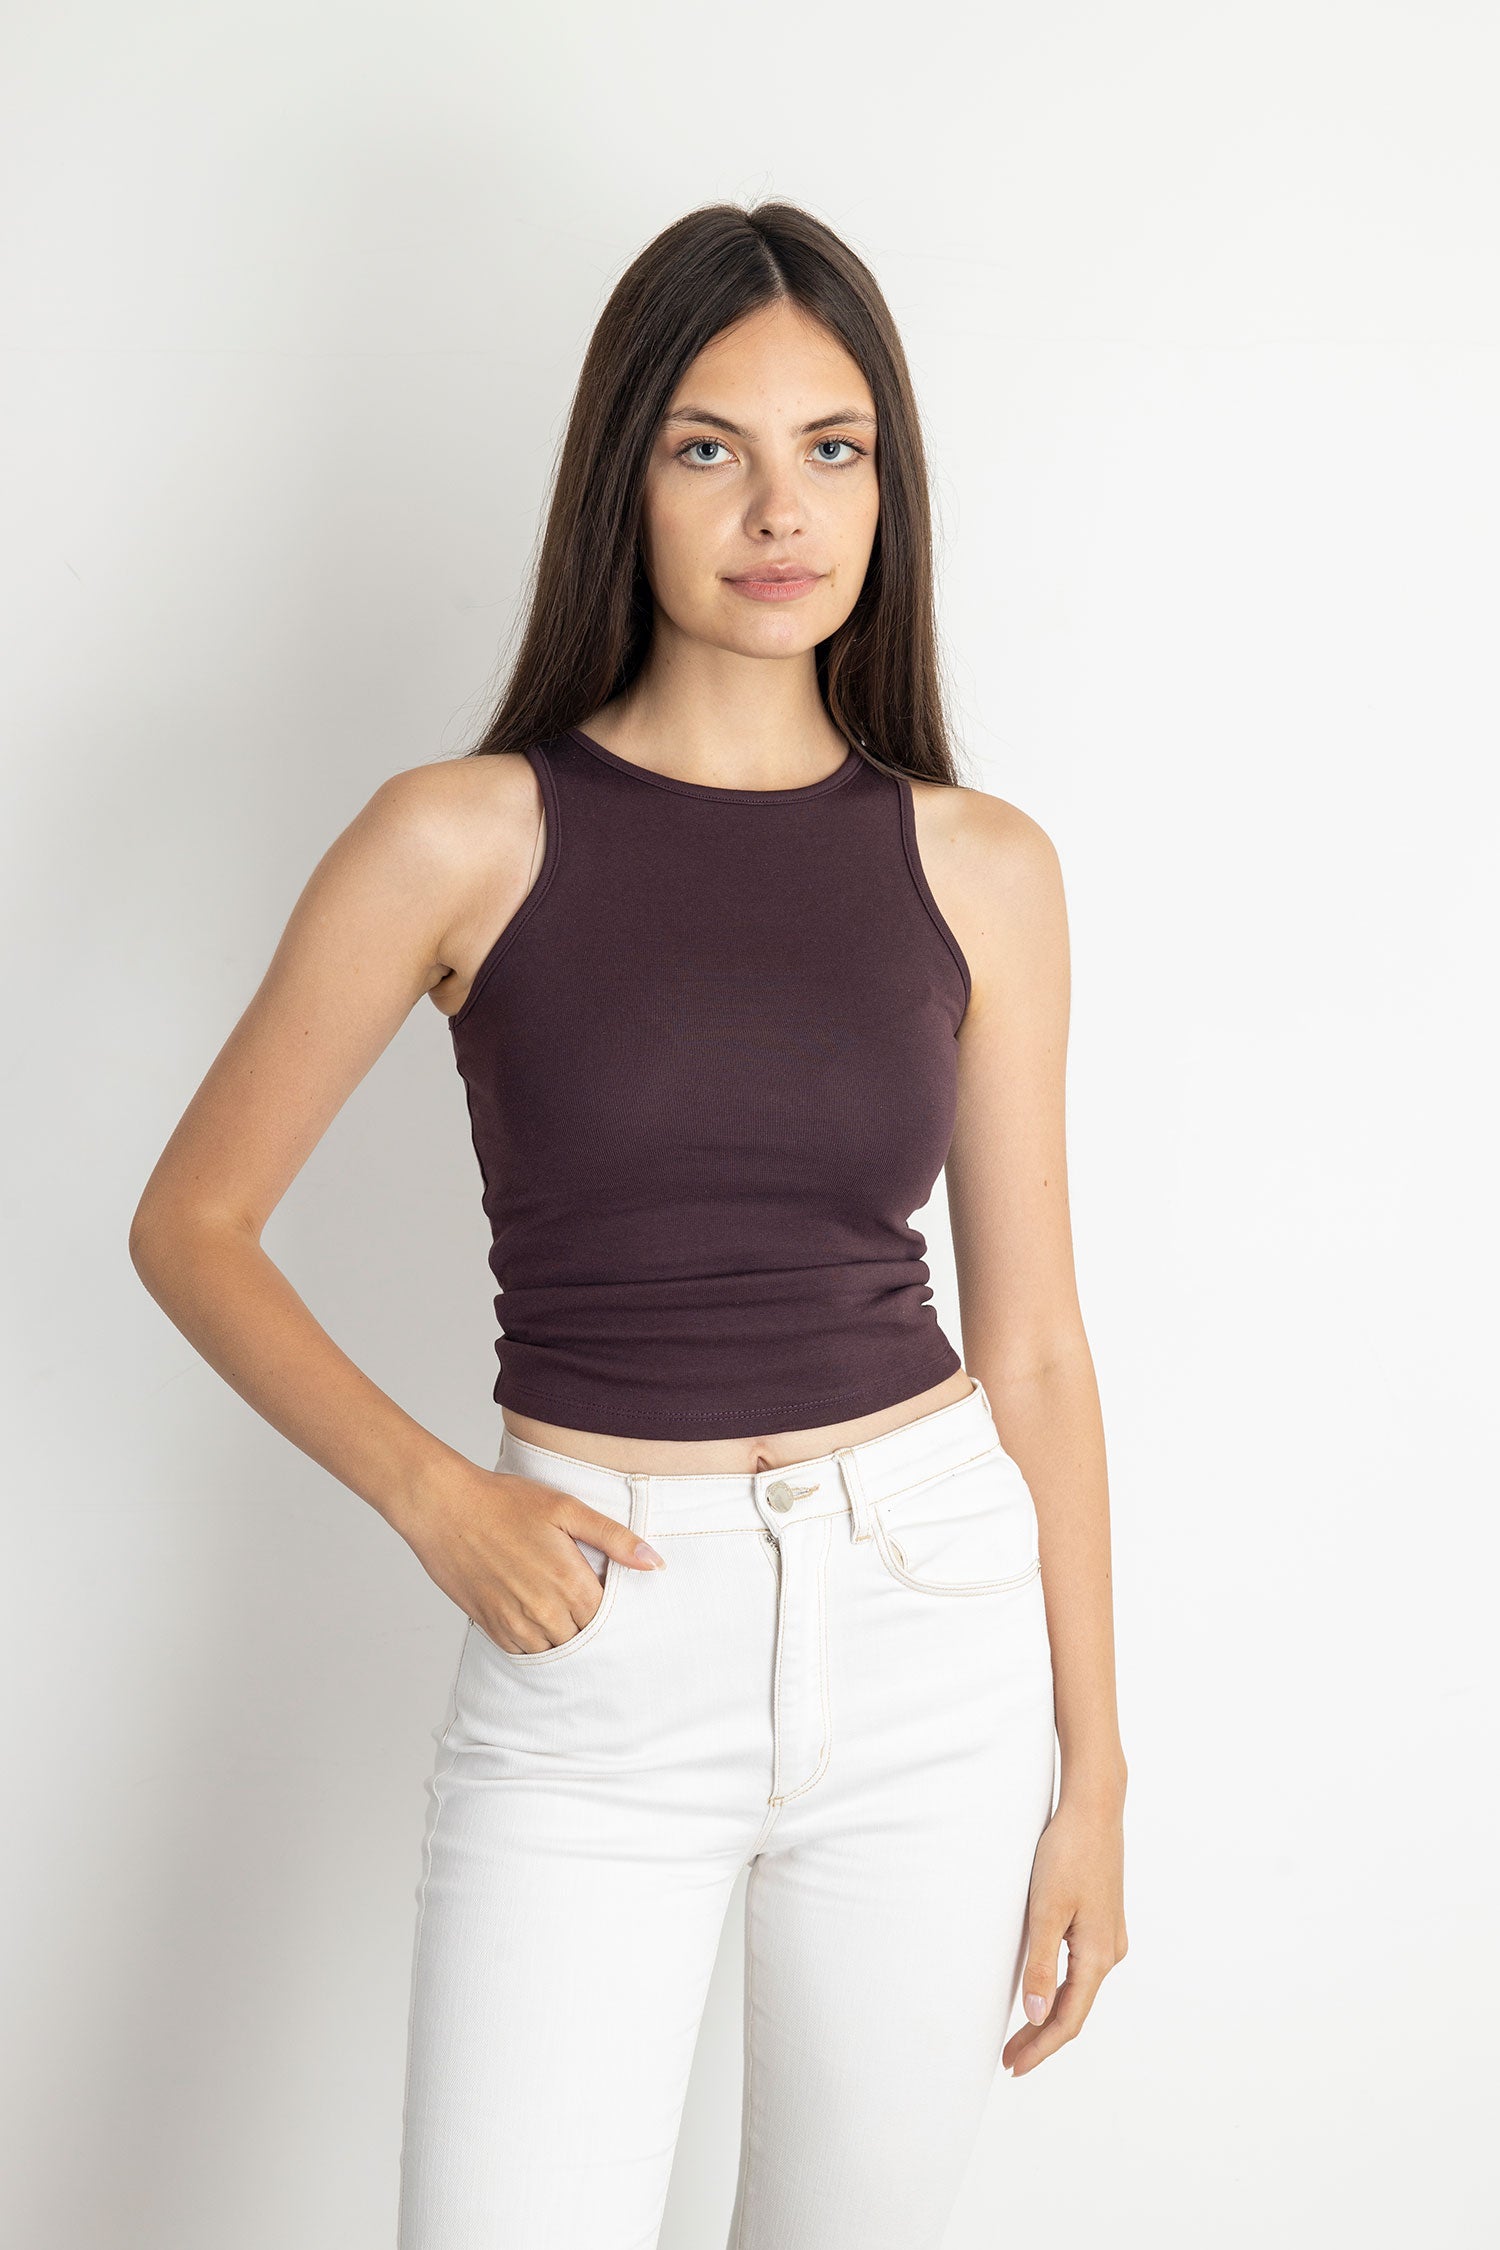 Belle By Tia Slim Fit Solid Sleeveless Tank Top